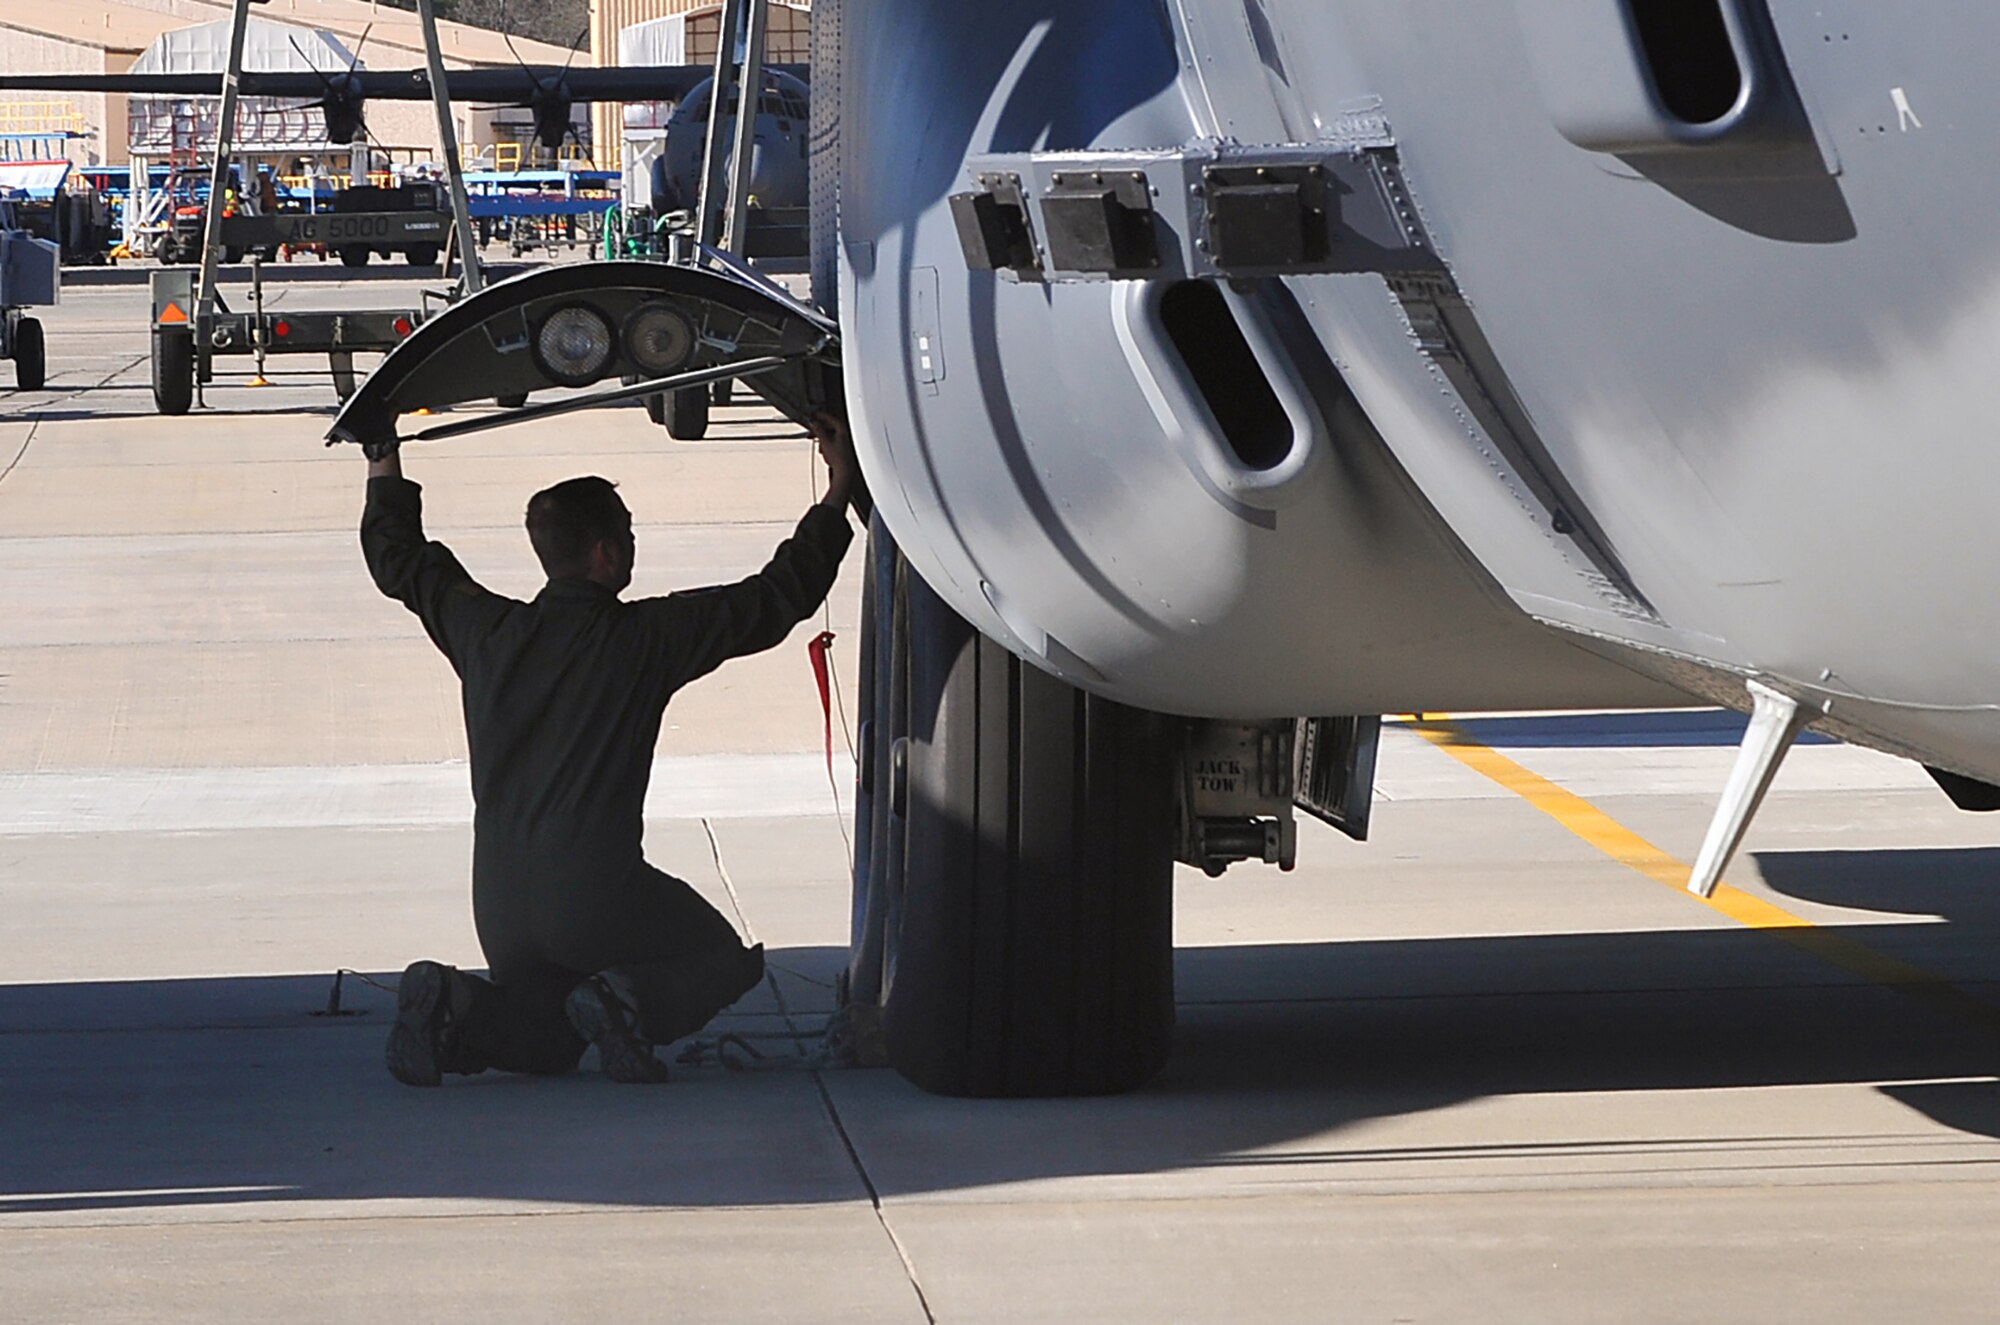 An Air Force Special Operations Command Airman conducts a pre-flight inspection prior to returning an AC-130 worked on at Robins to its home unit. (U.S. Air Force photo by Tommie Horton)